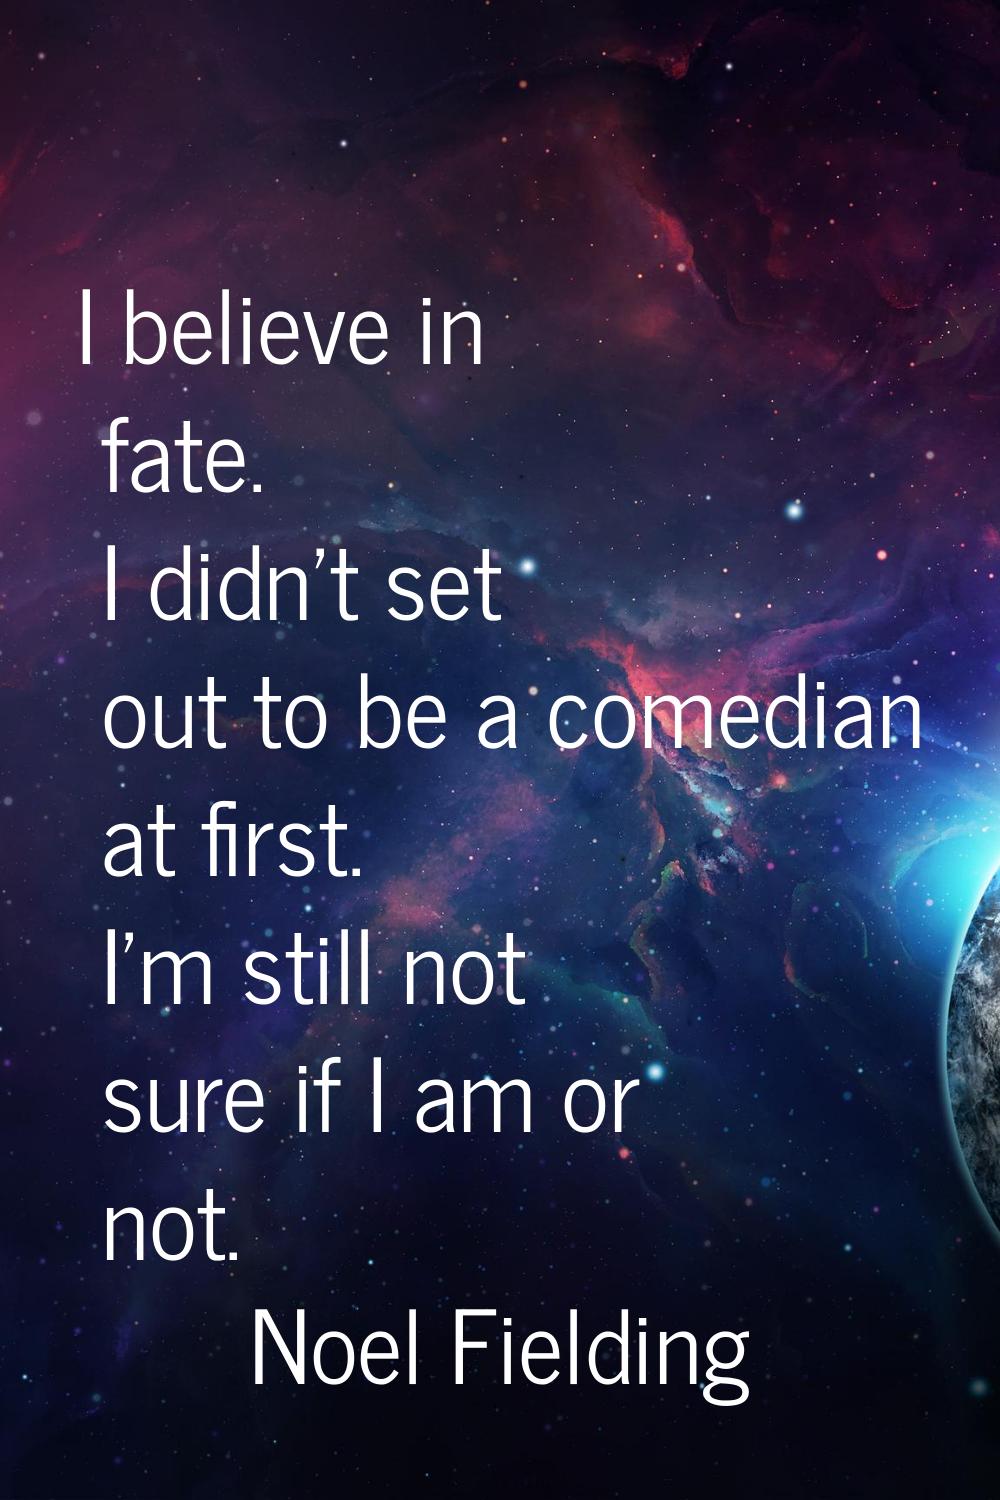 I believe in fate. I didn't set out to be a comedian at first. I'm still not sure if I am or not.